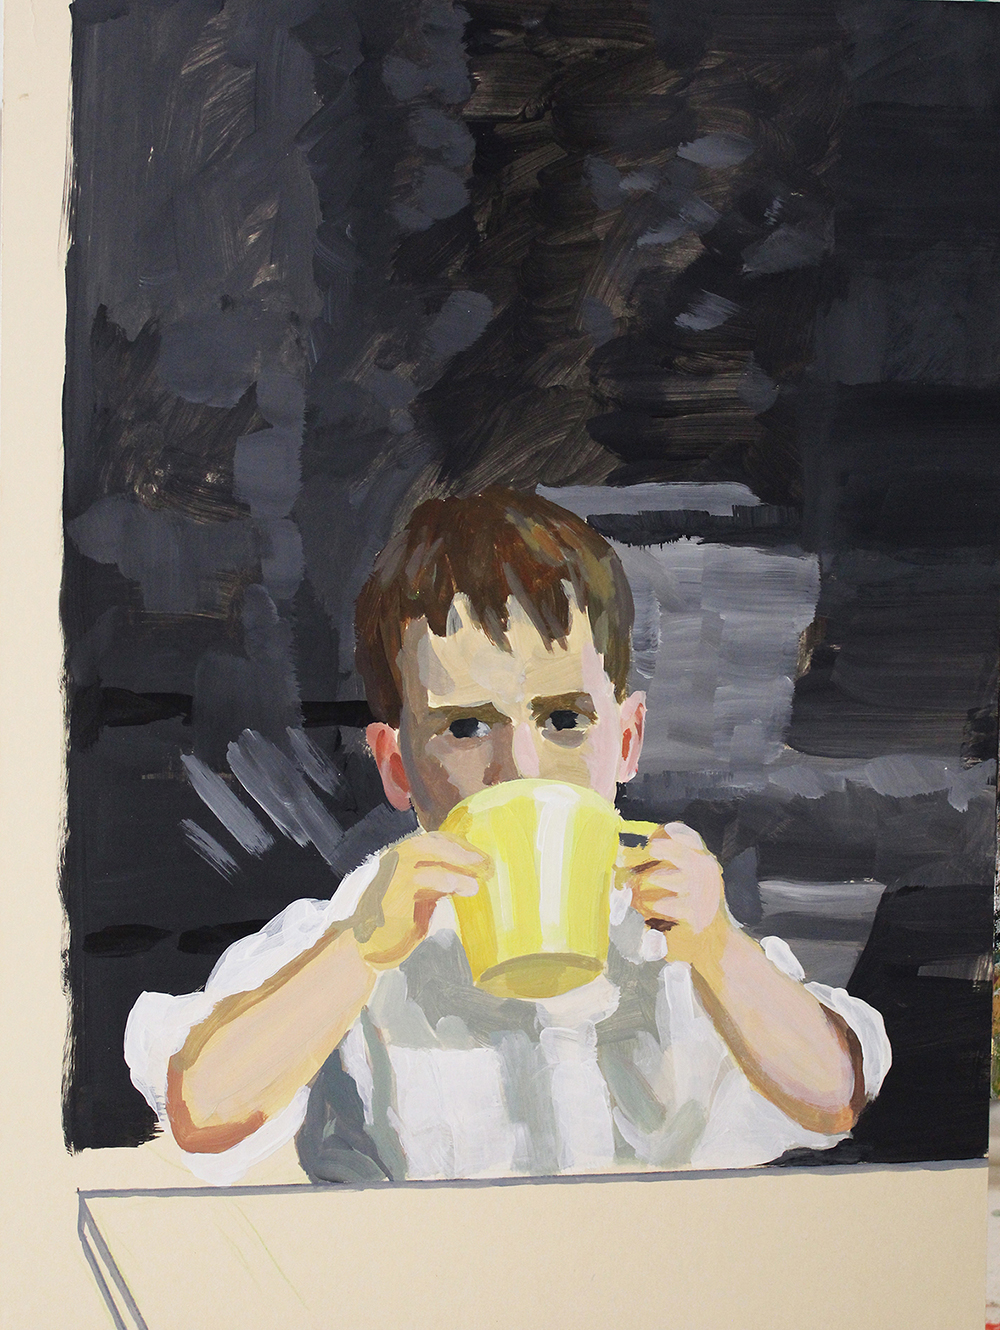 Child drinking from a yellow cup